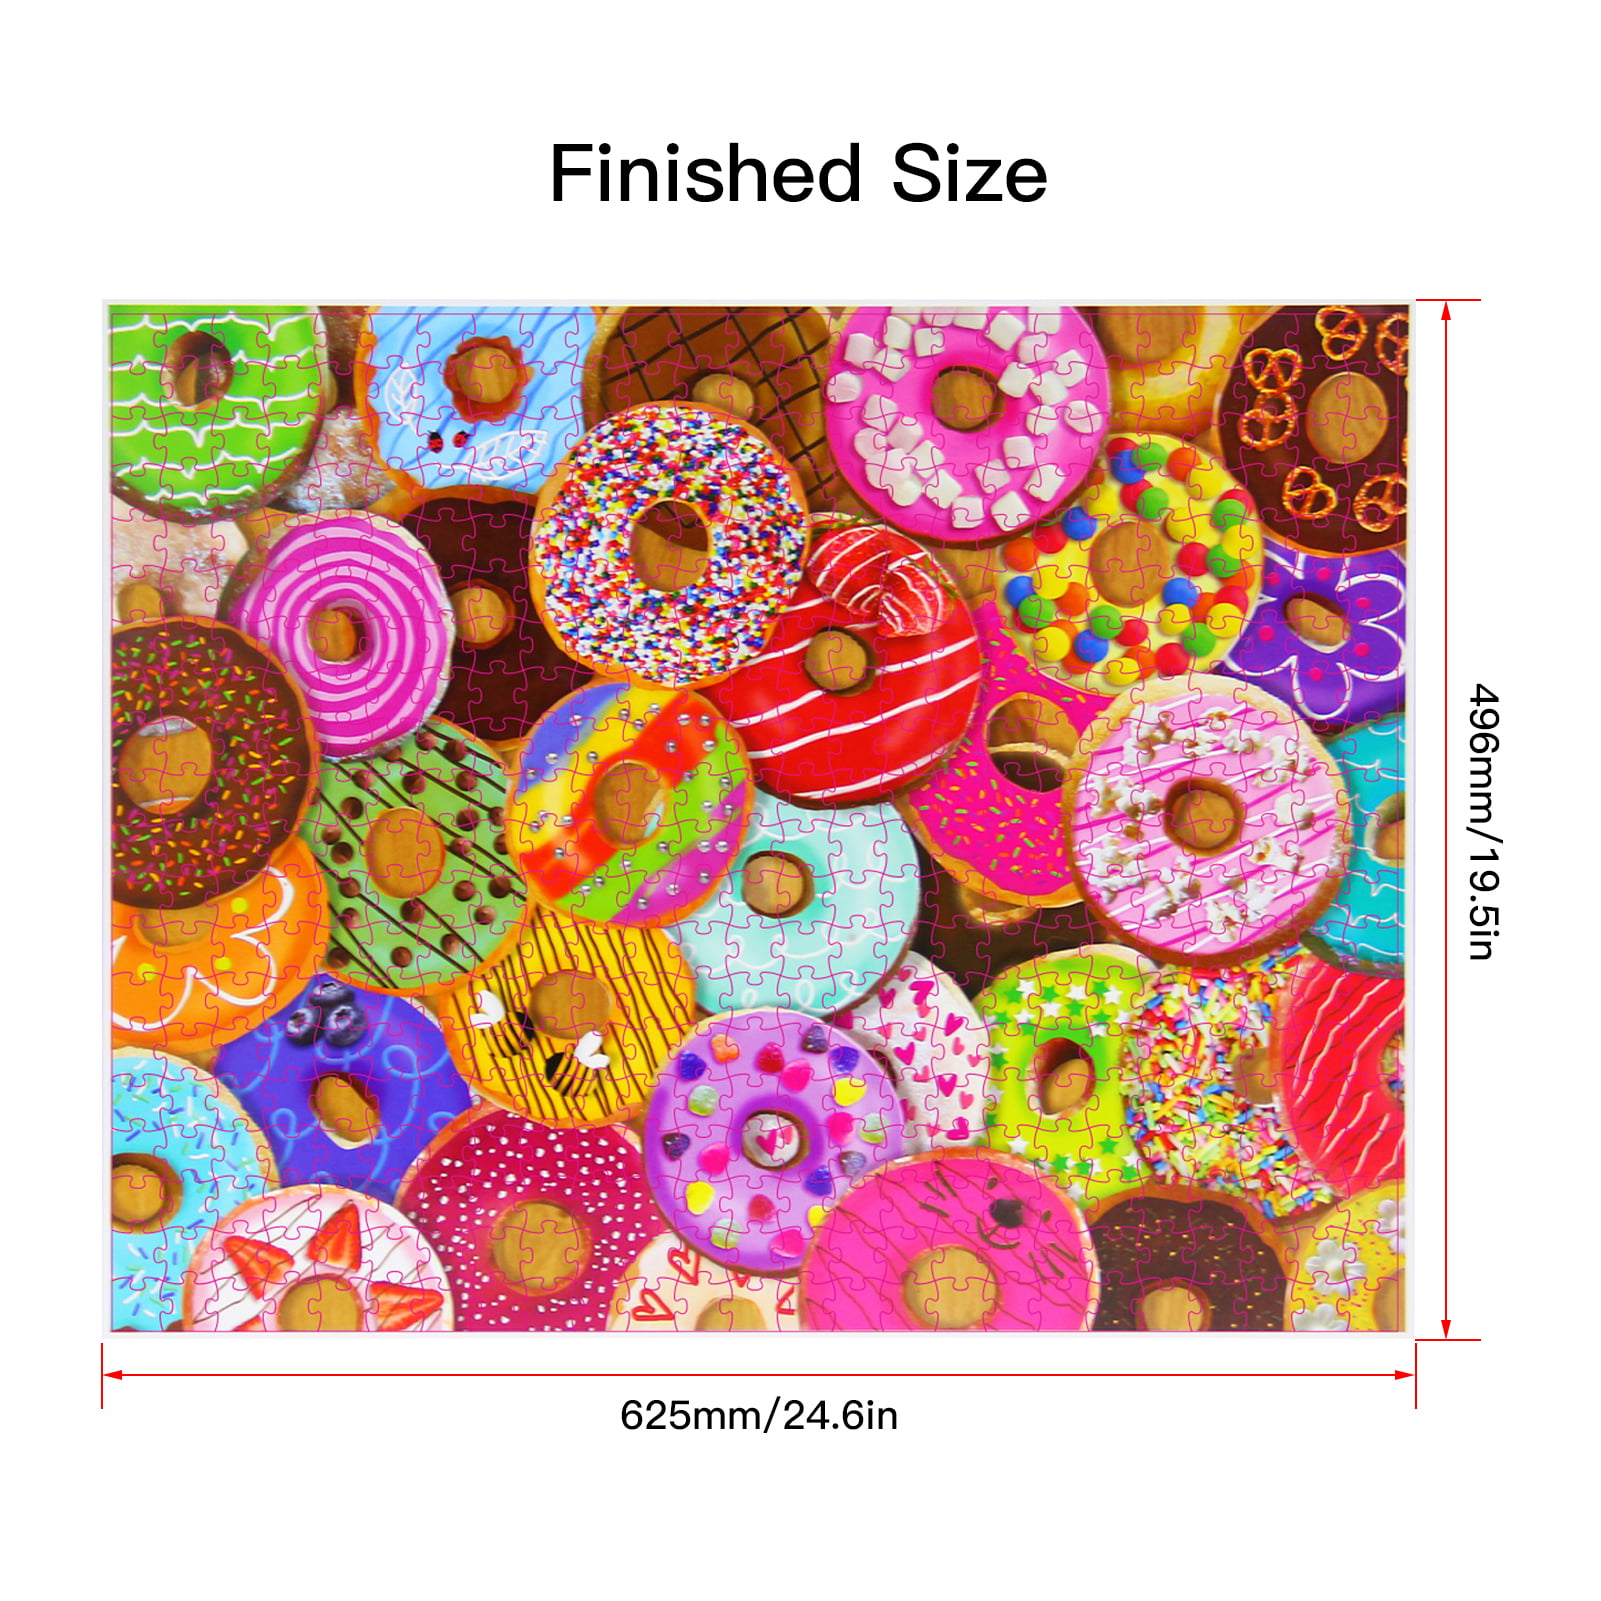 Details about   1000 Pieces DIY Jigsaw Tropical Beach Puzzle For Adults Kids Educational Toys